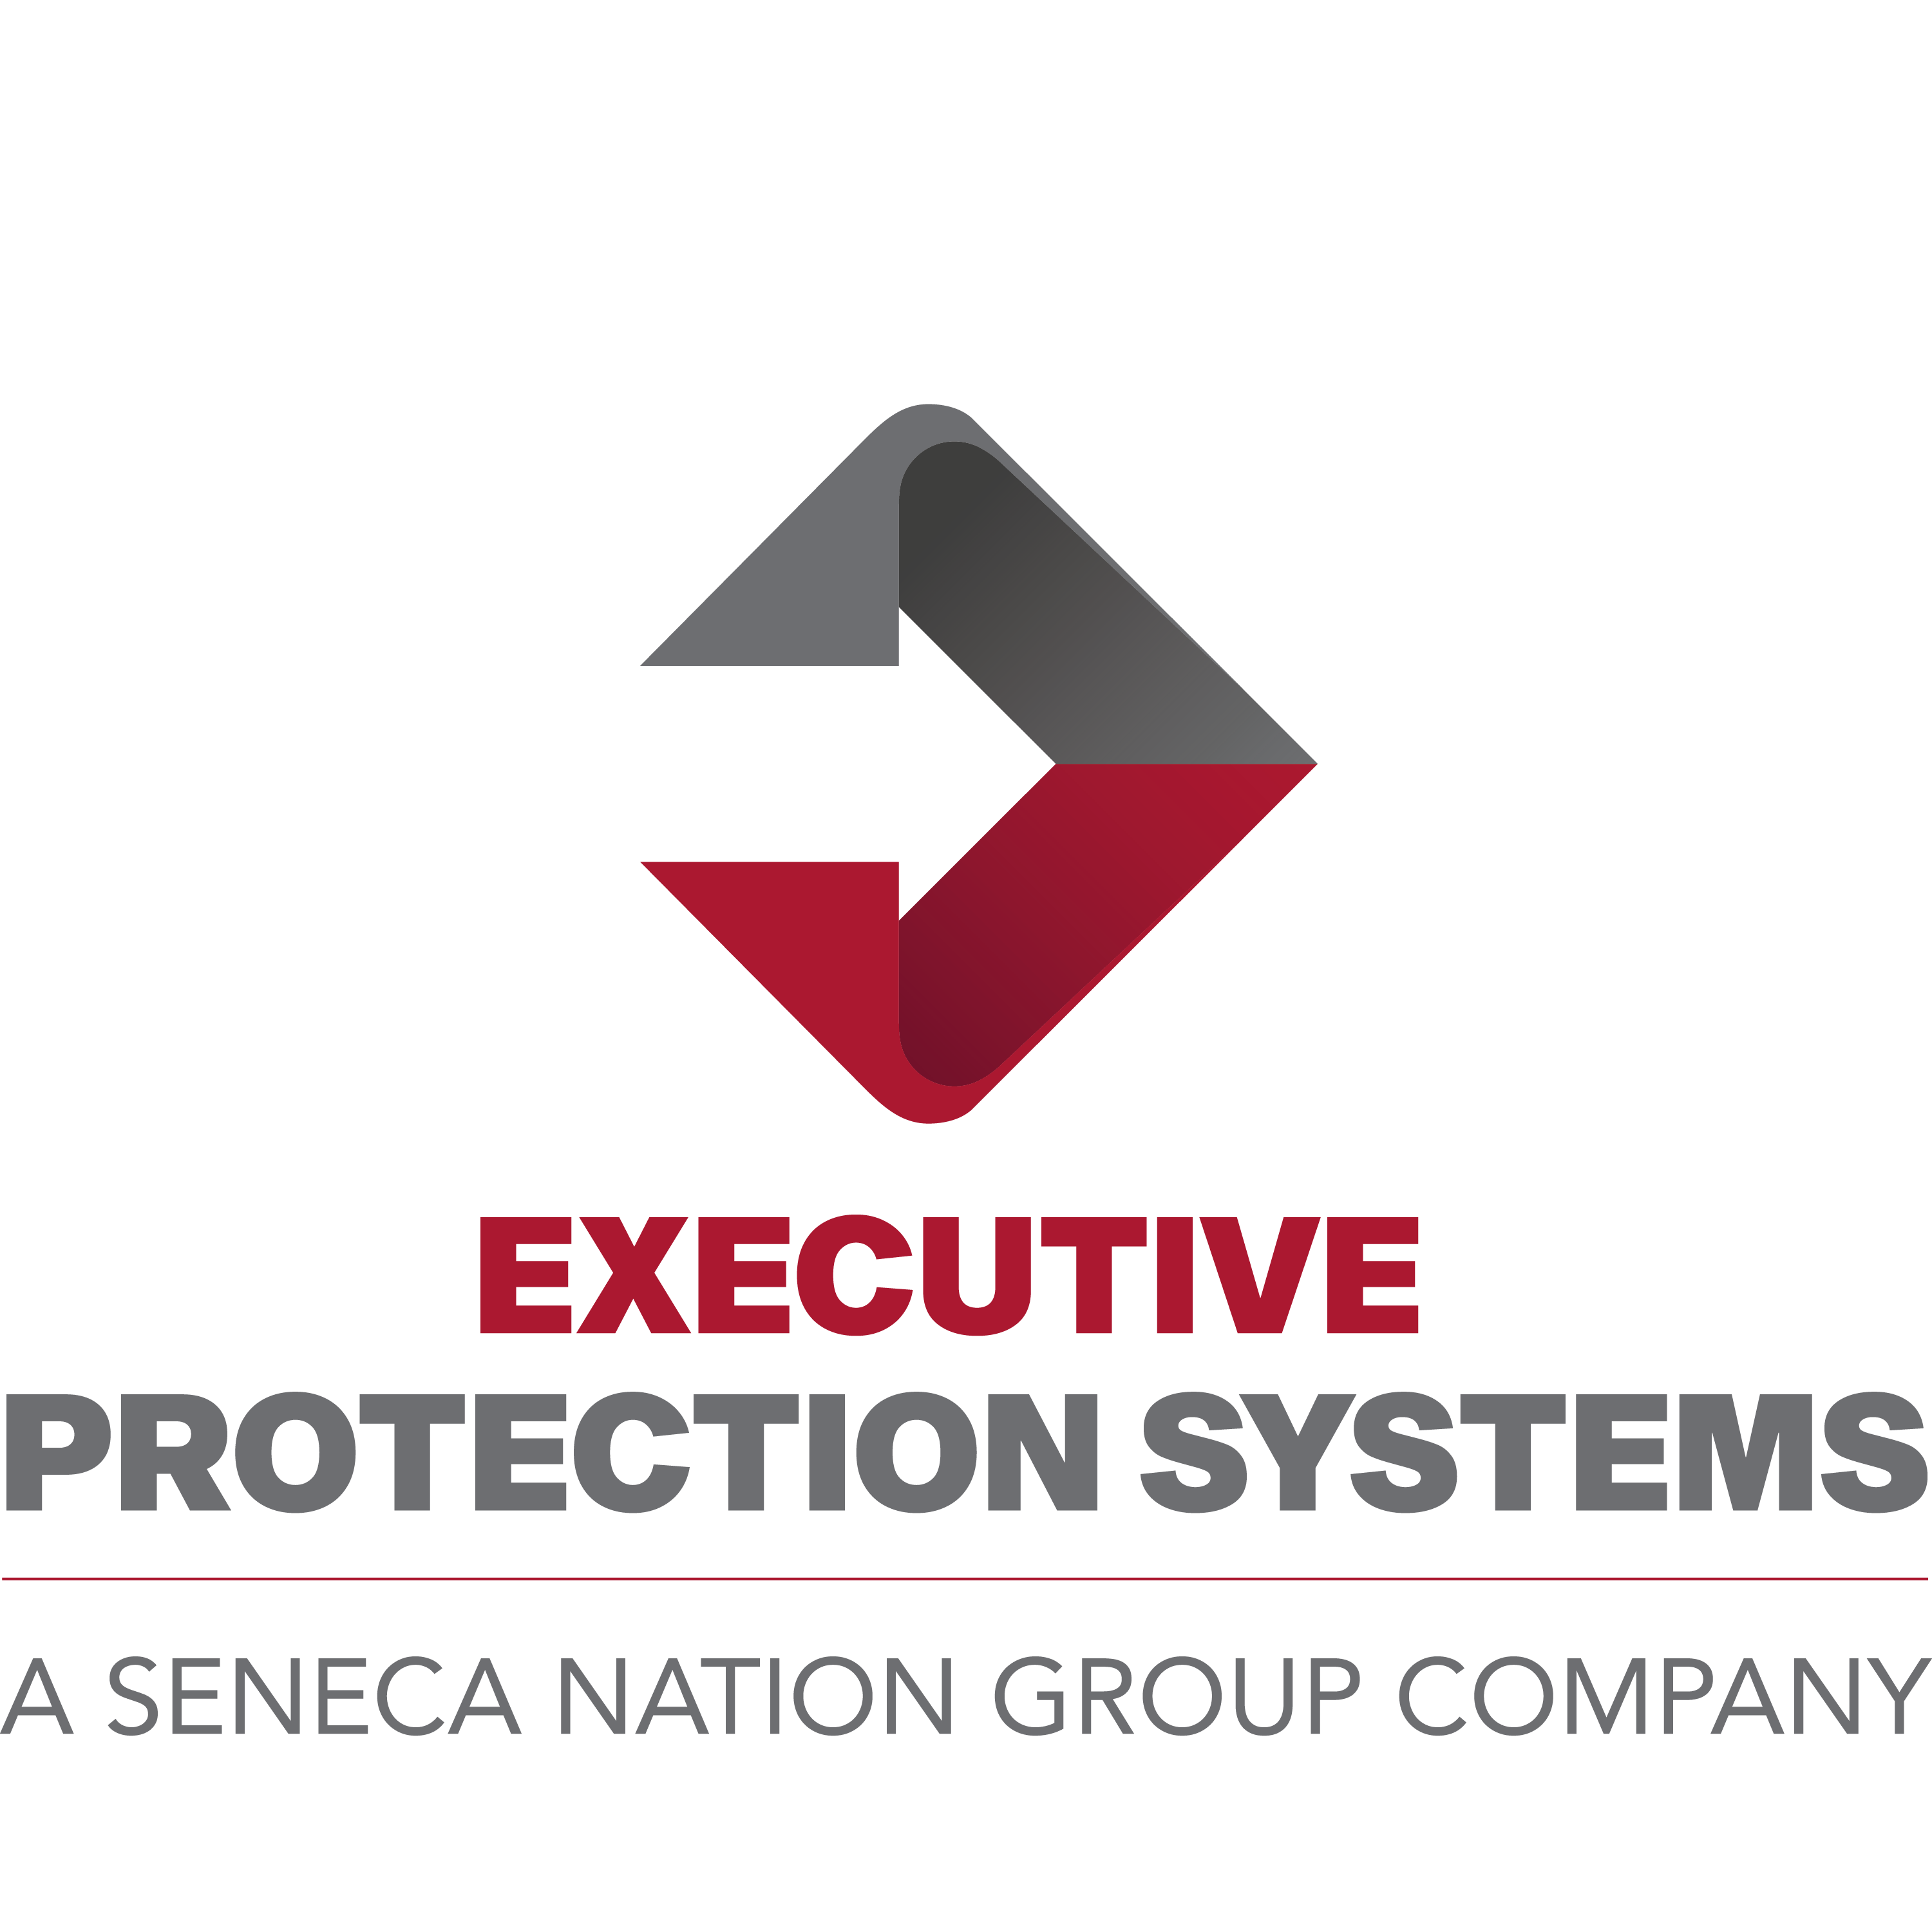 Executive Protection Systems